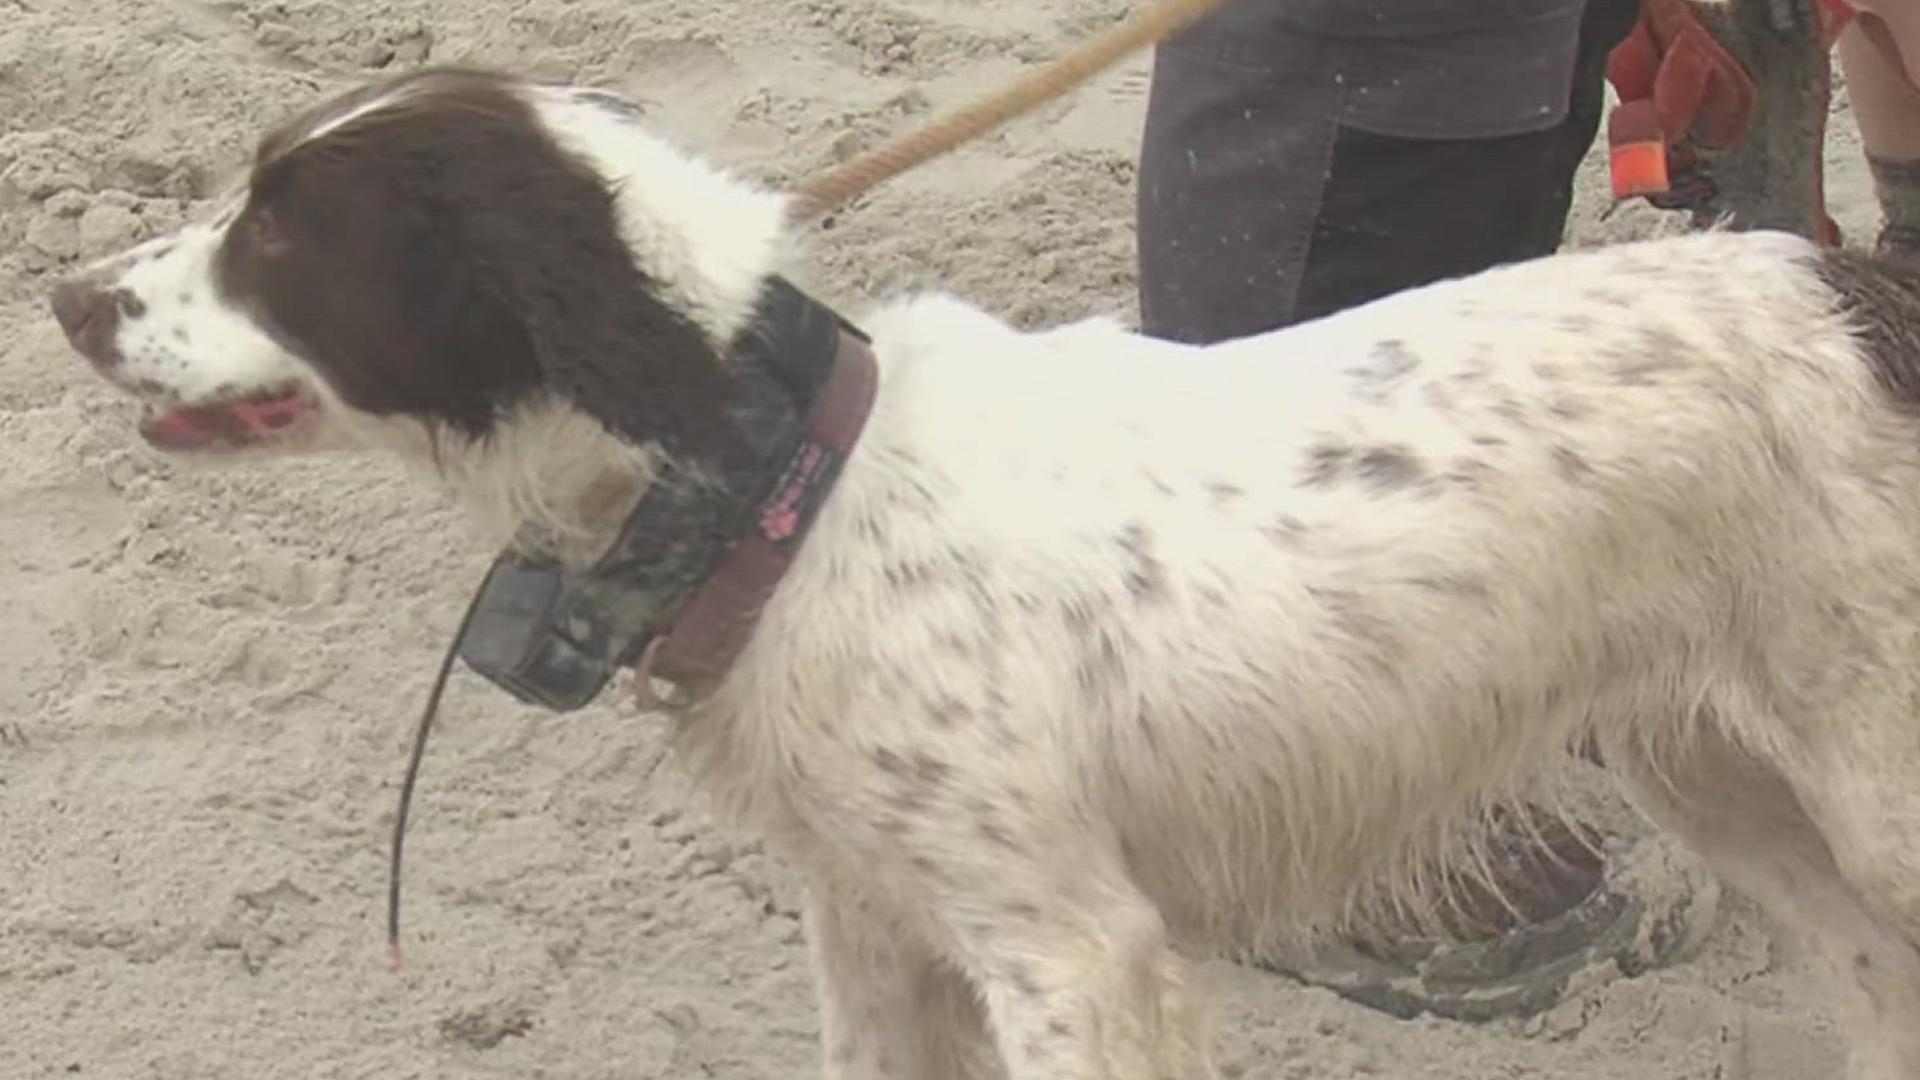 Poppy is an English Springer Spaniel trained to detect tar clumps buried under sand and seaweed at our beaches.